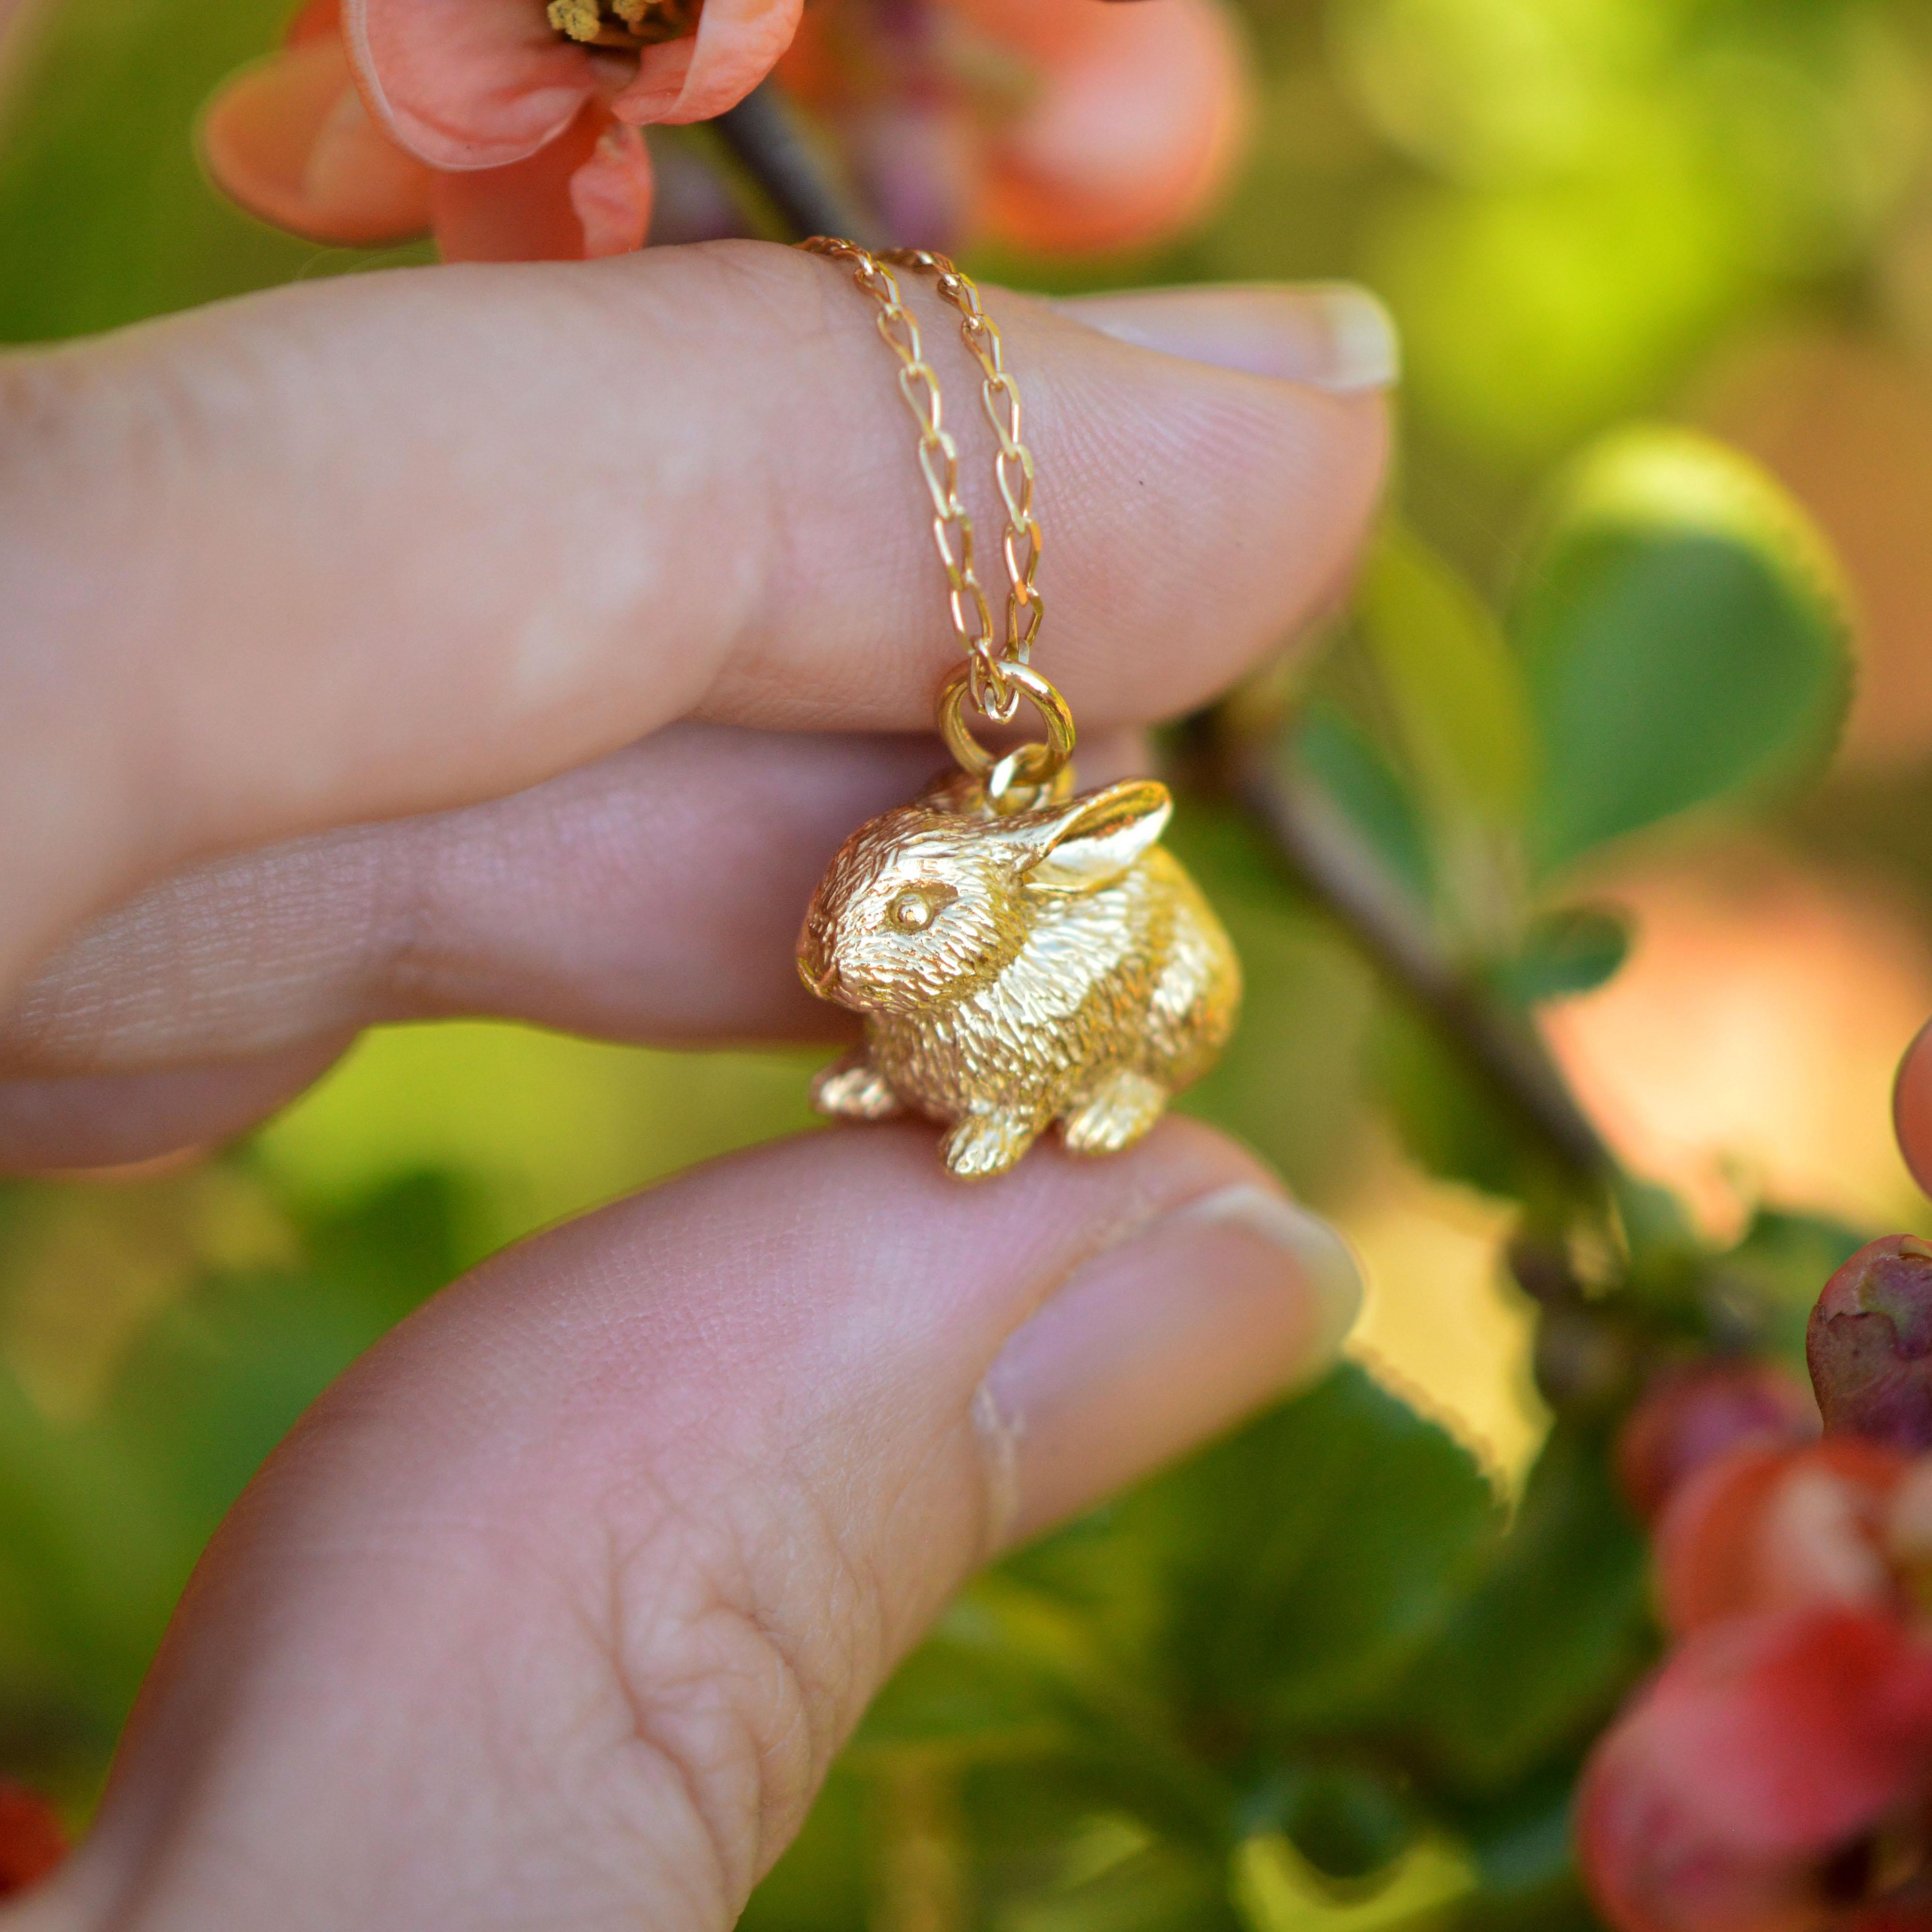 This miniature baby rabbit pendant is cast in solid 18 Carat gold and finished by hand, and is created from Lucy's original hand-sculpted design. 

This bunny pendant is made in London, United Kingdom using recycled or Fairtrade Gold. Metals are